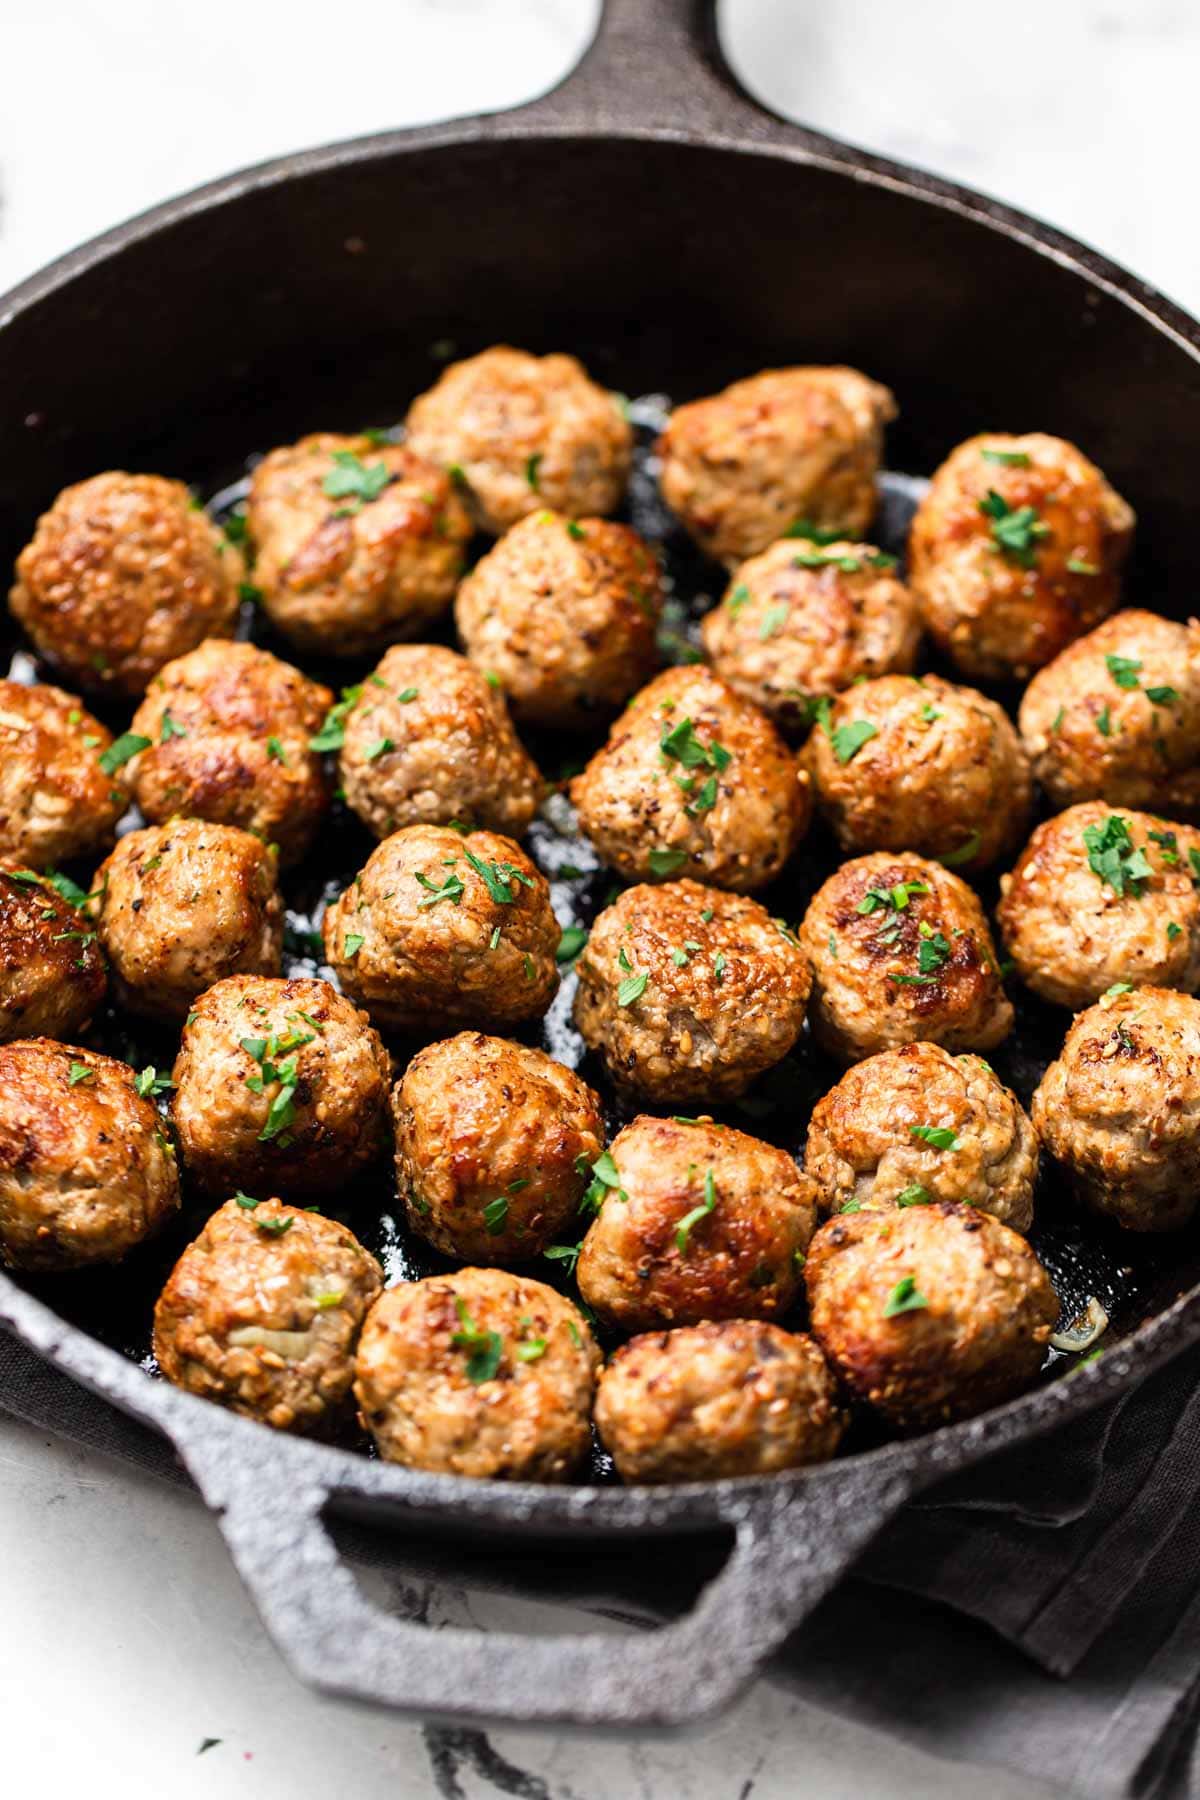 Cooked meatballs in a cast iron pan.